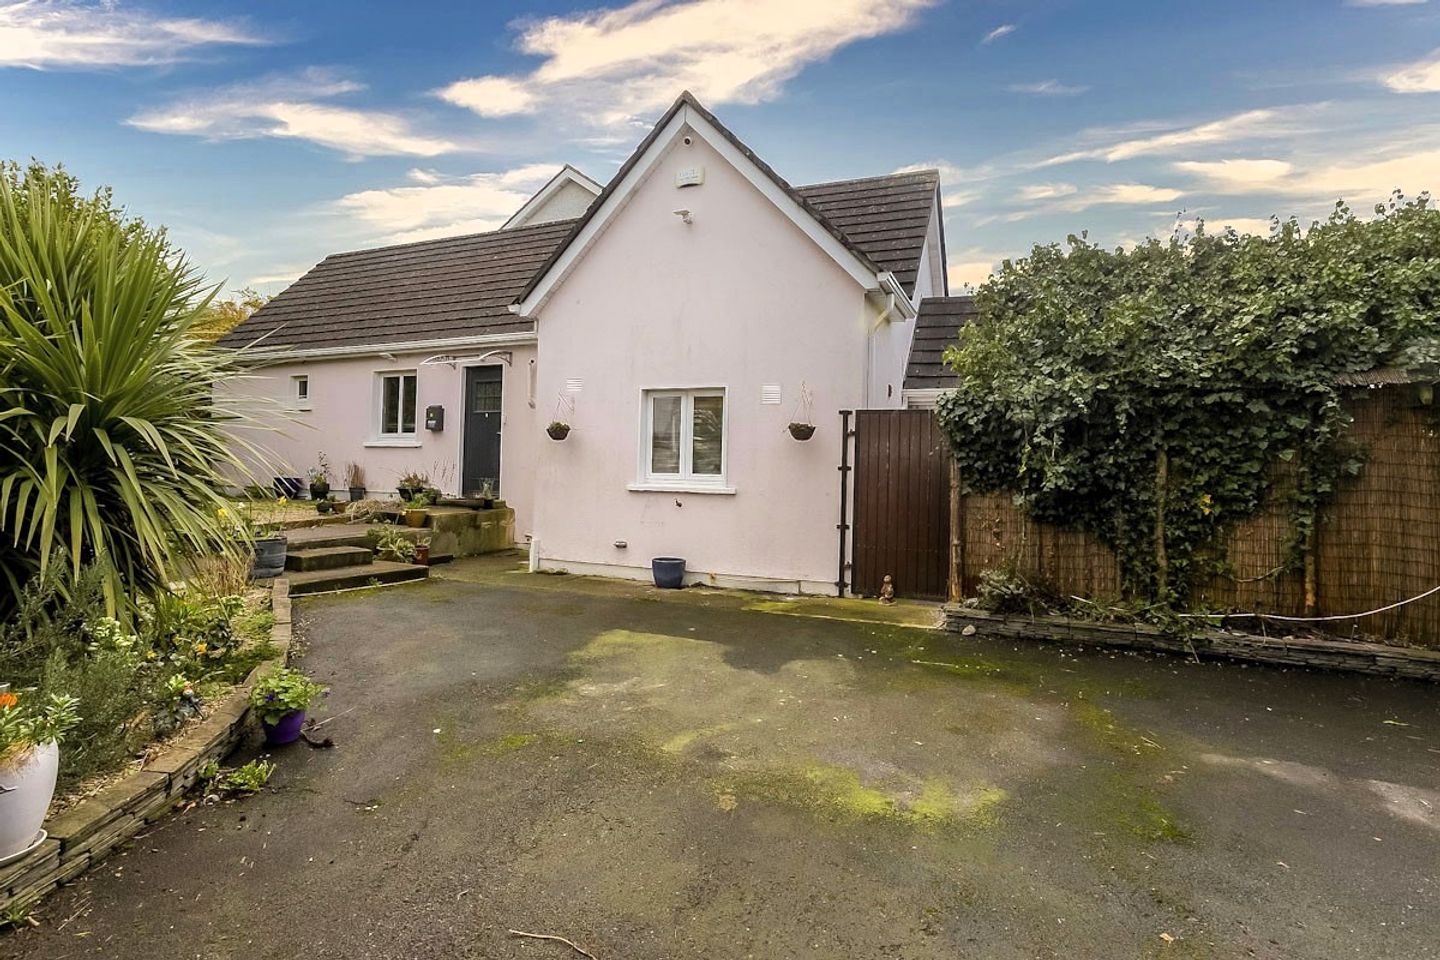 Willow Cottage, 2A Woodlands Park, Glenageary, Co. Dublin, A96F7P2